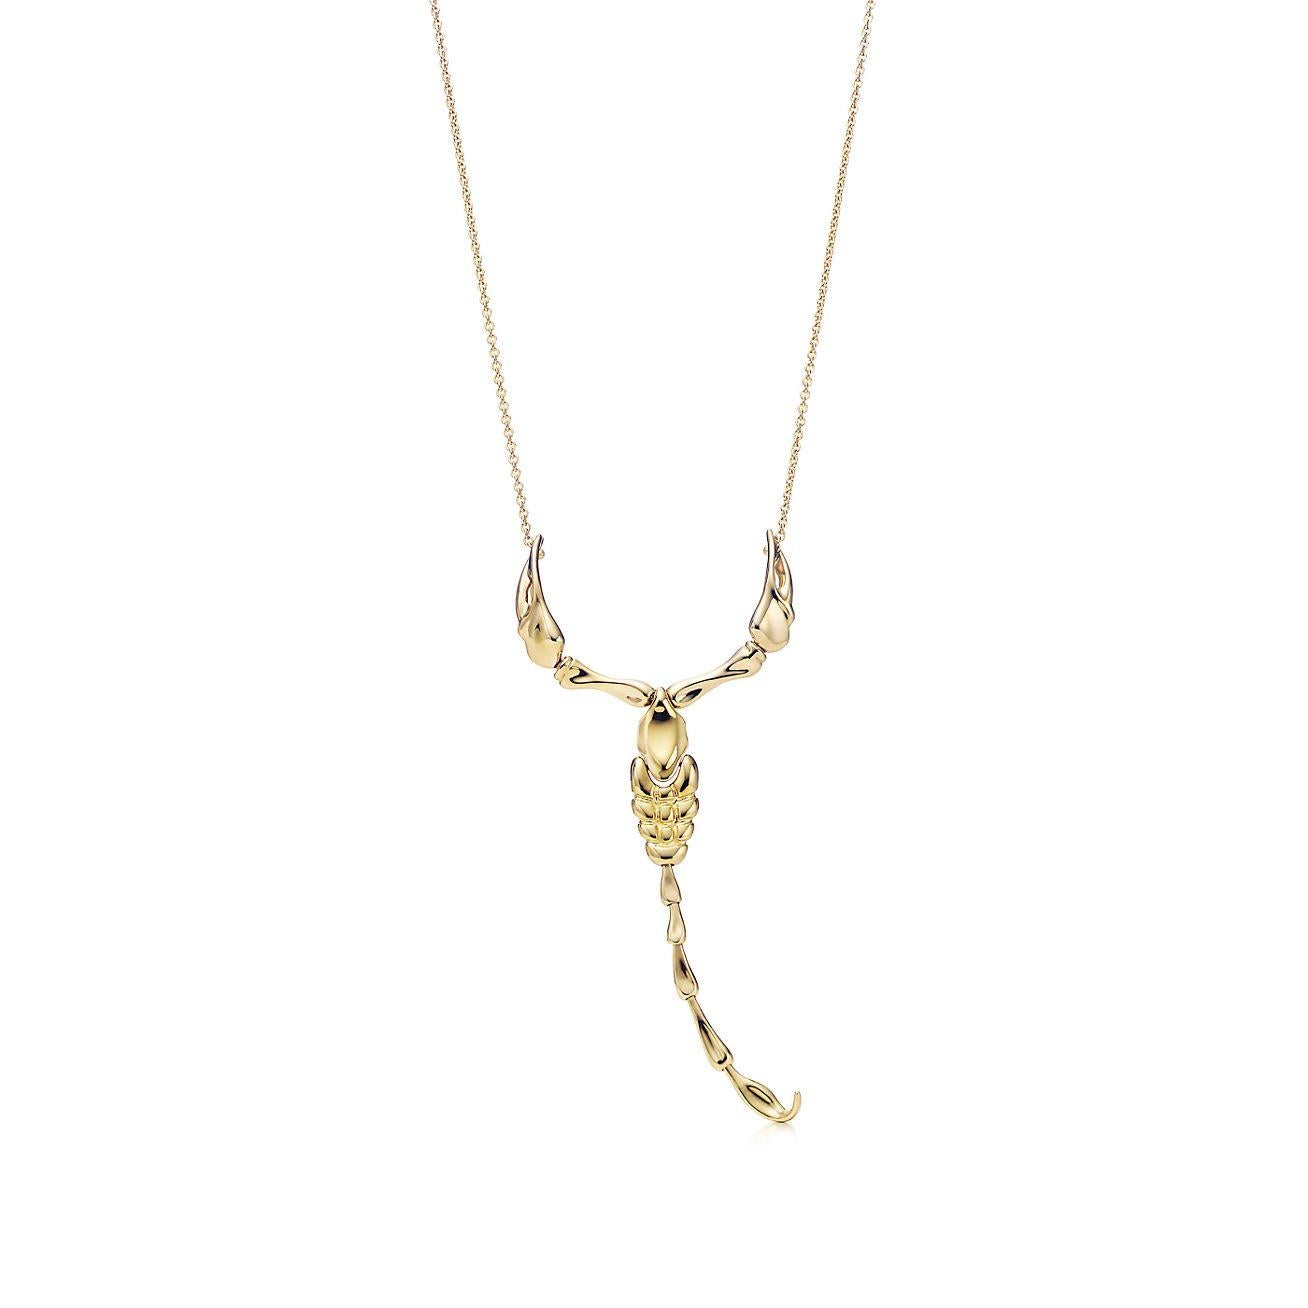 Tiffany & Co. Elsa Peretti 18k Yellow Gold Scorpio Zodiac Necklace w/Box & Pouch

Here is your chance to purchase a beautiful and highly collectible designer necklace.  Truly a great piece at a great price! 

The weight is 18.1 grams.  The length of